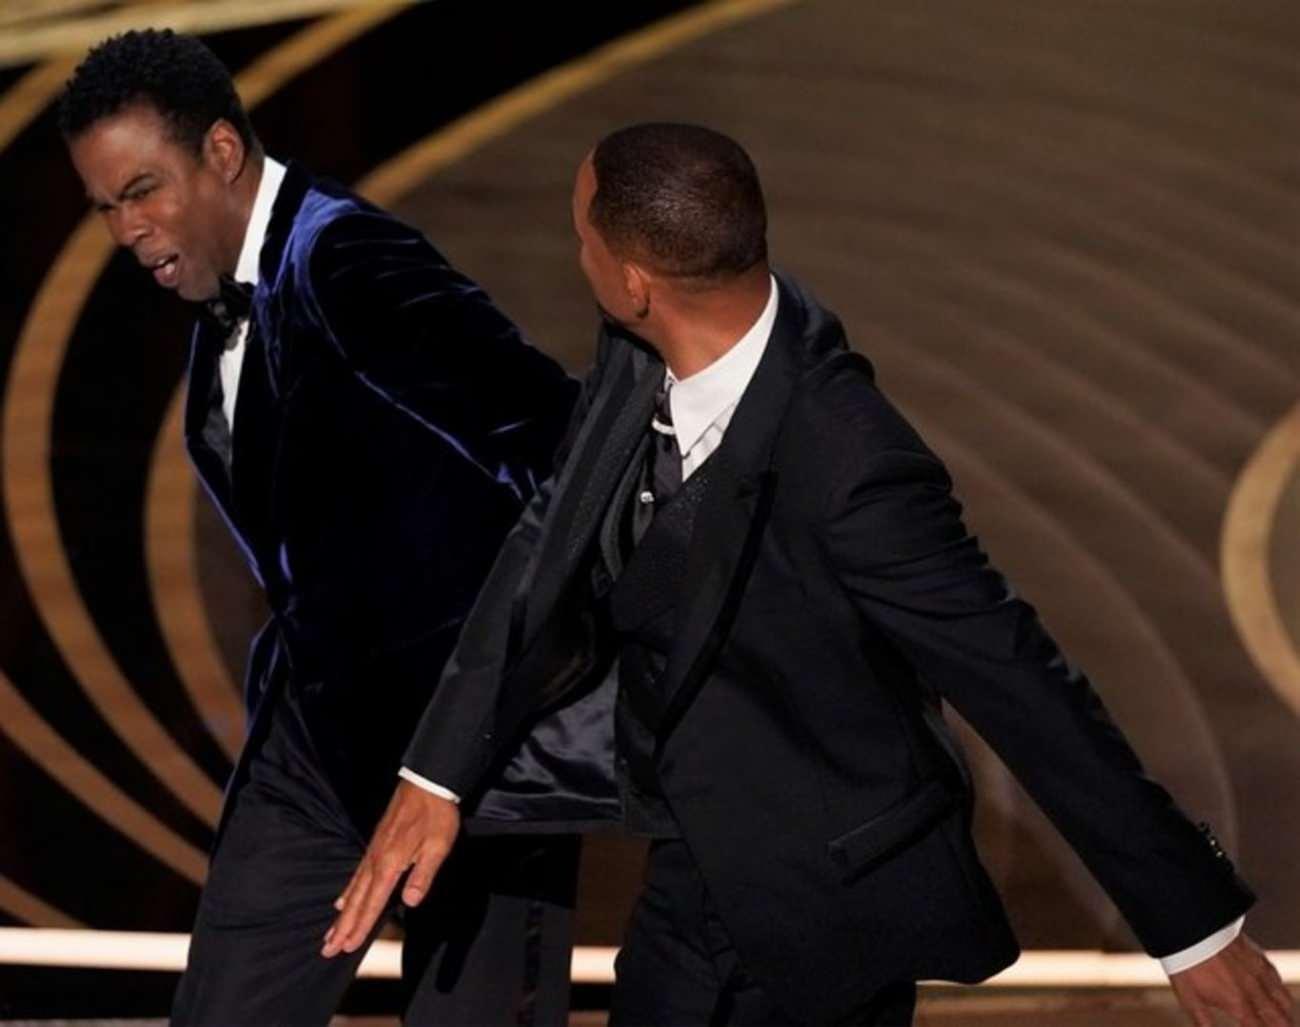 Will Smith ve Chris Rock